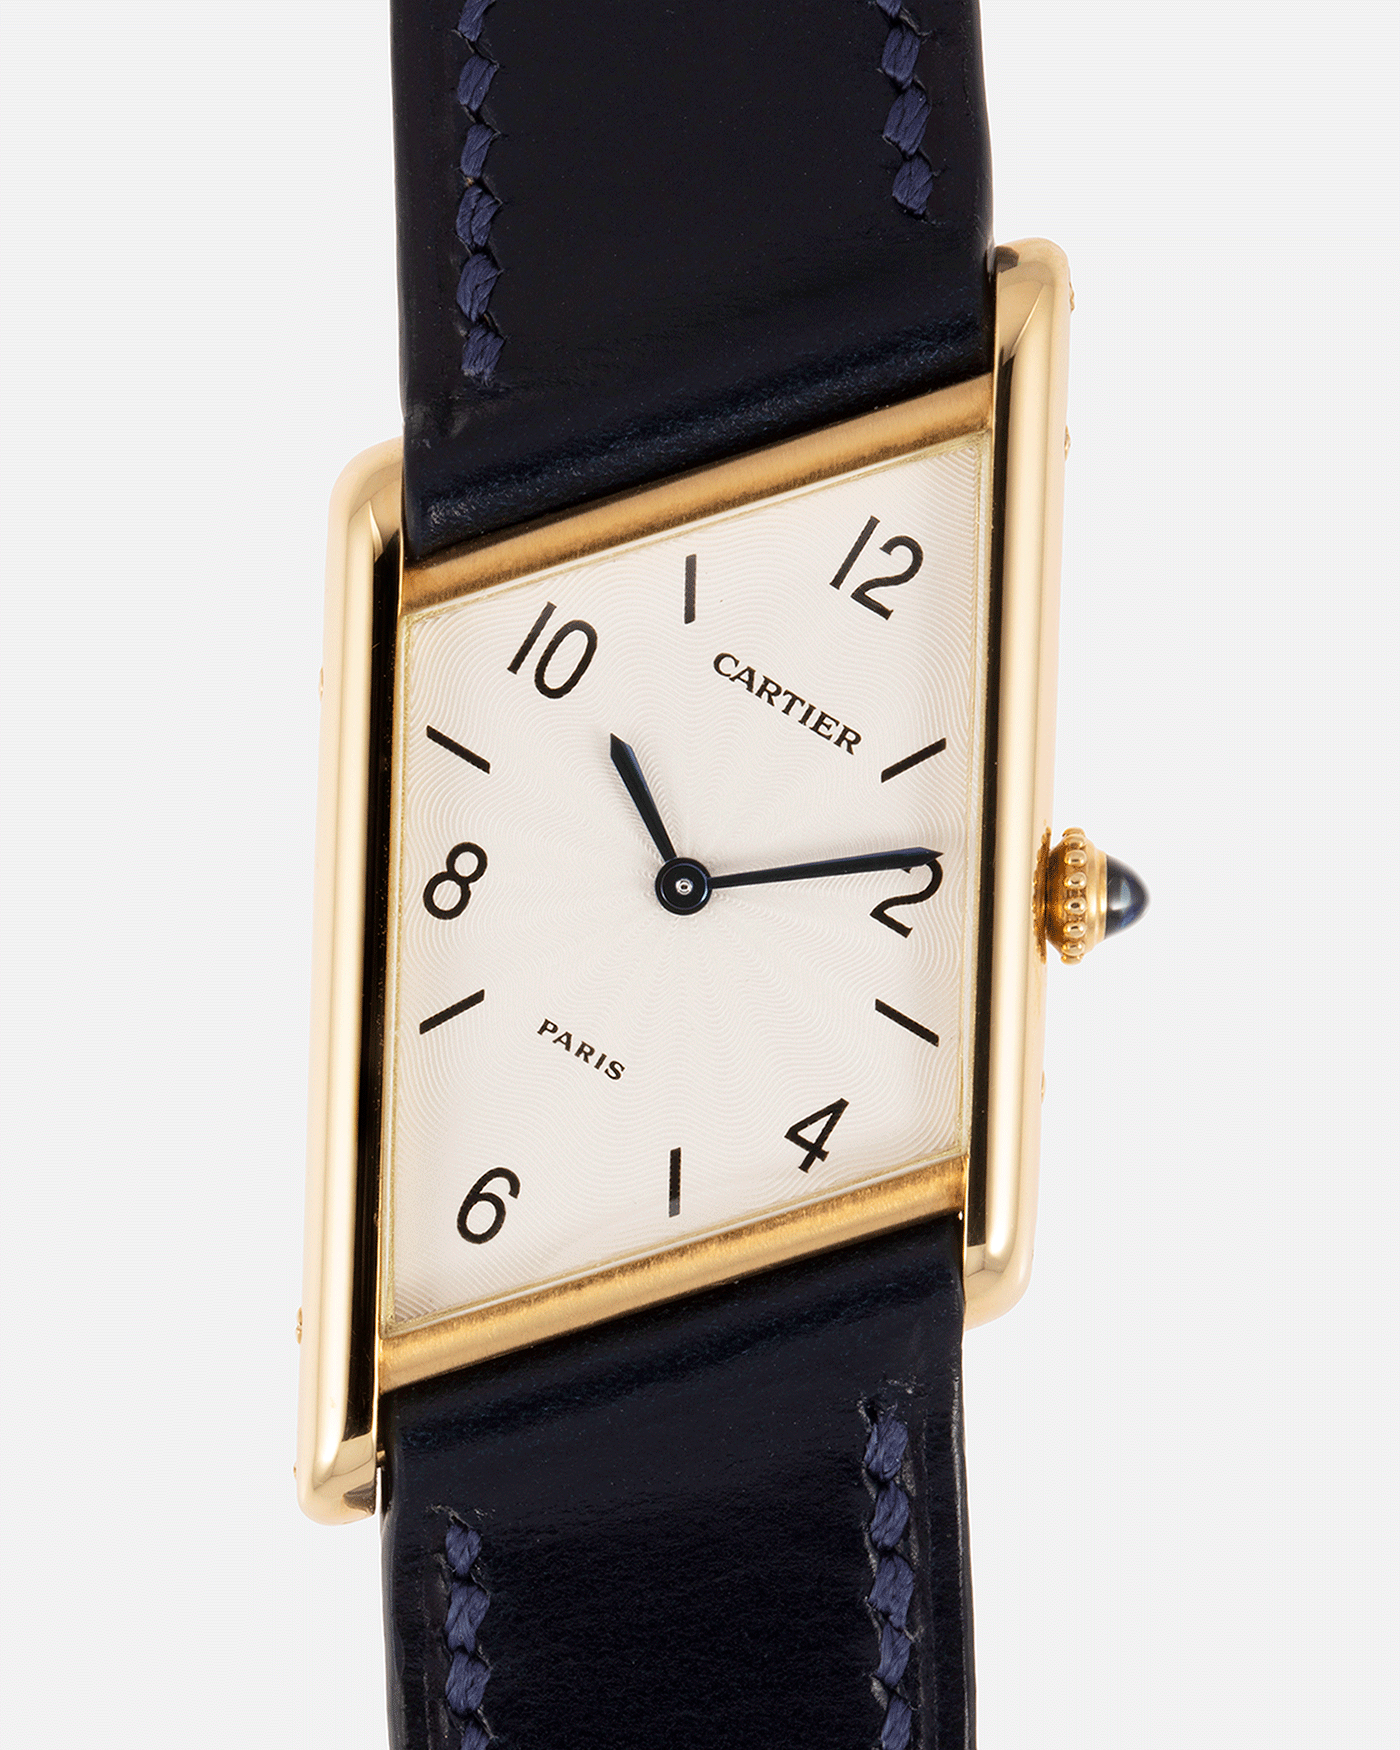 Brand: Cartier Year: 1996 Model: Tank Asymmetrique Limited Reference Number: 2488 Material: 18k Yellow Gold Movement: Cartier Cal. 9P2 Case Diameter: 23mm X 33mm Strap: Nostime Blue Leather with 18k Cartier Yellow Gold Deployant